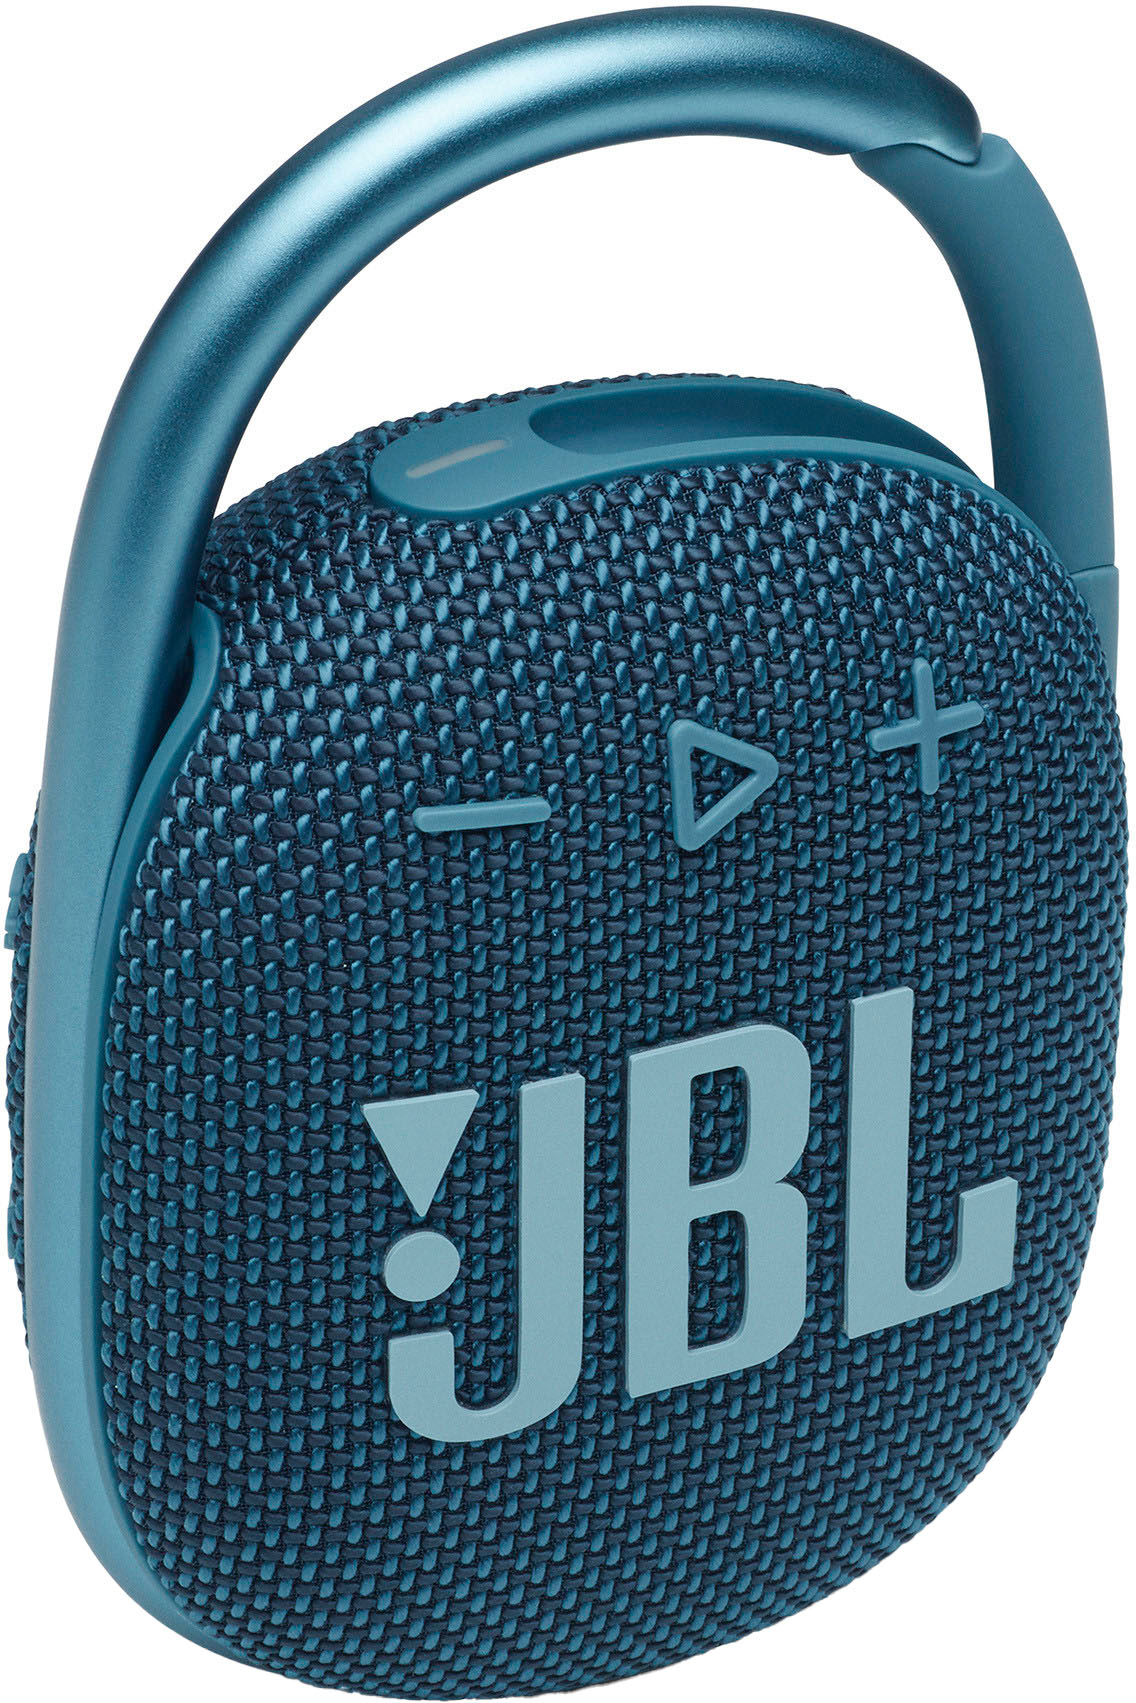 Angle View: JBL - CLIP4 Portable Bluetooth Speaker - Blue